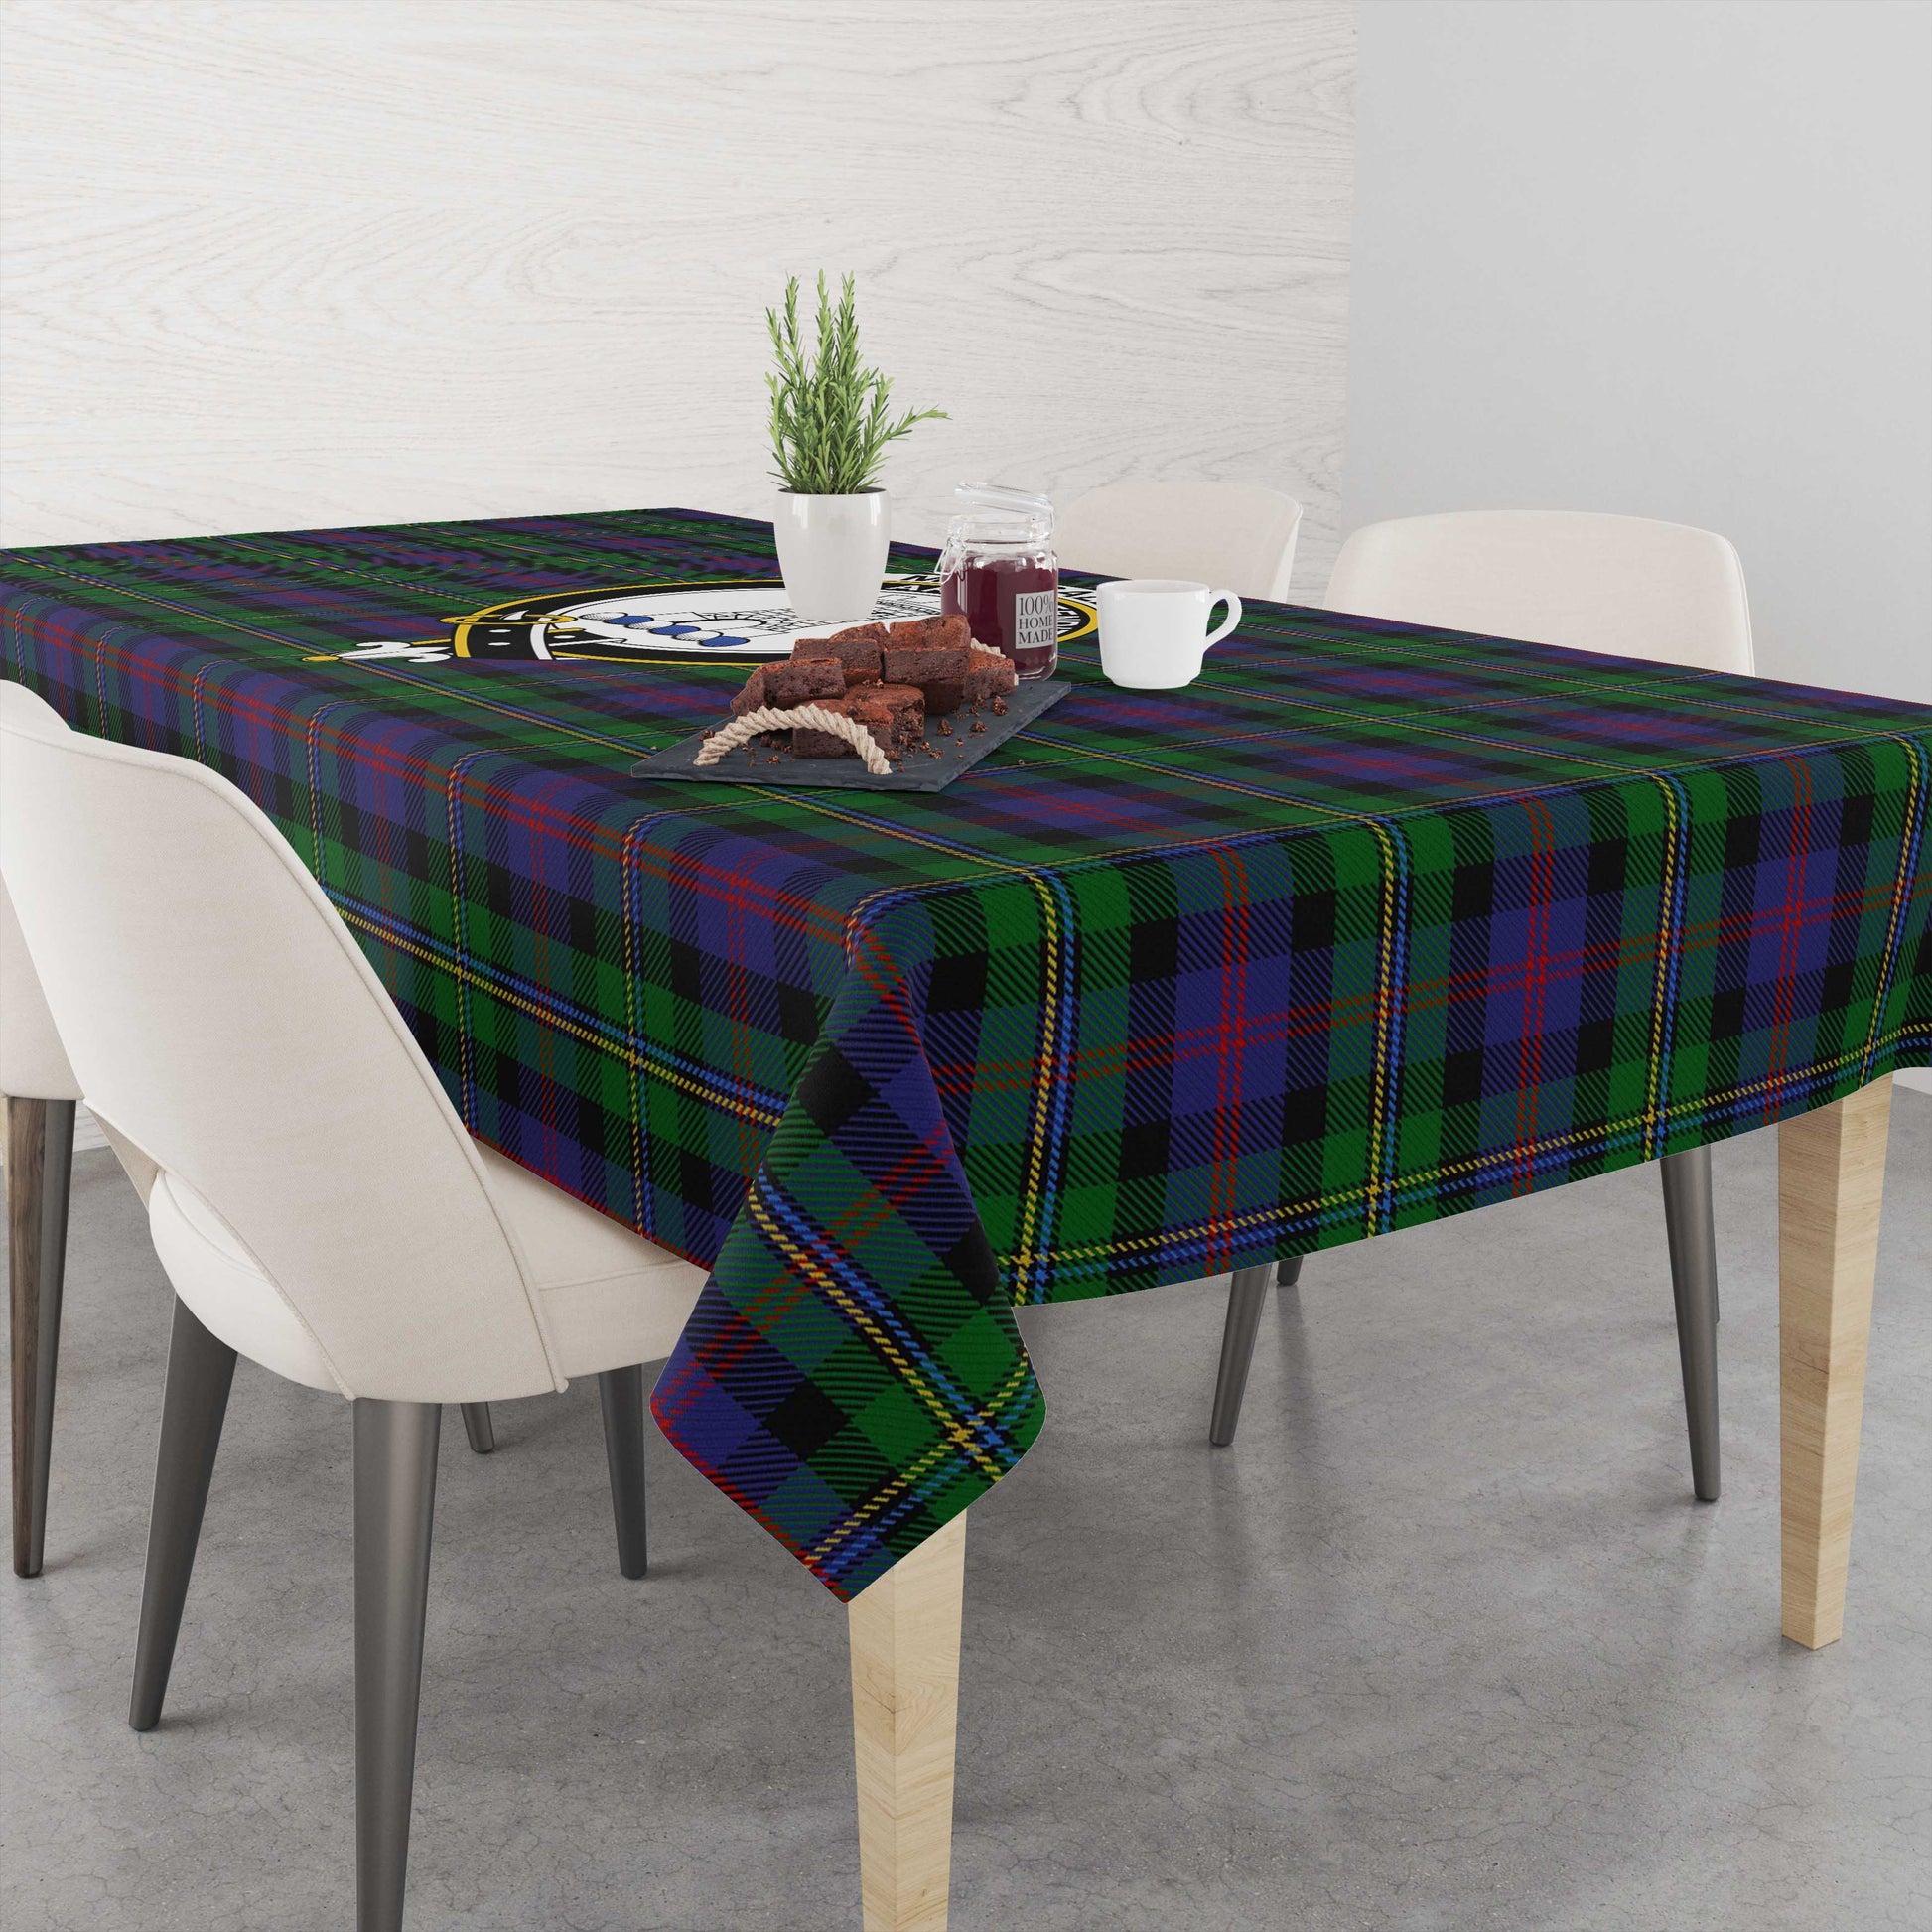 maccallum-tatan-tablecloth-with-family-crest